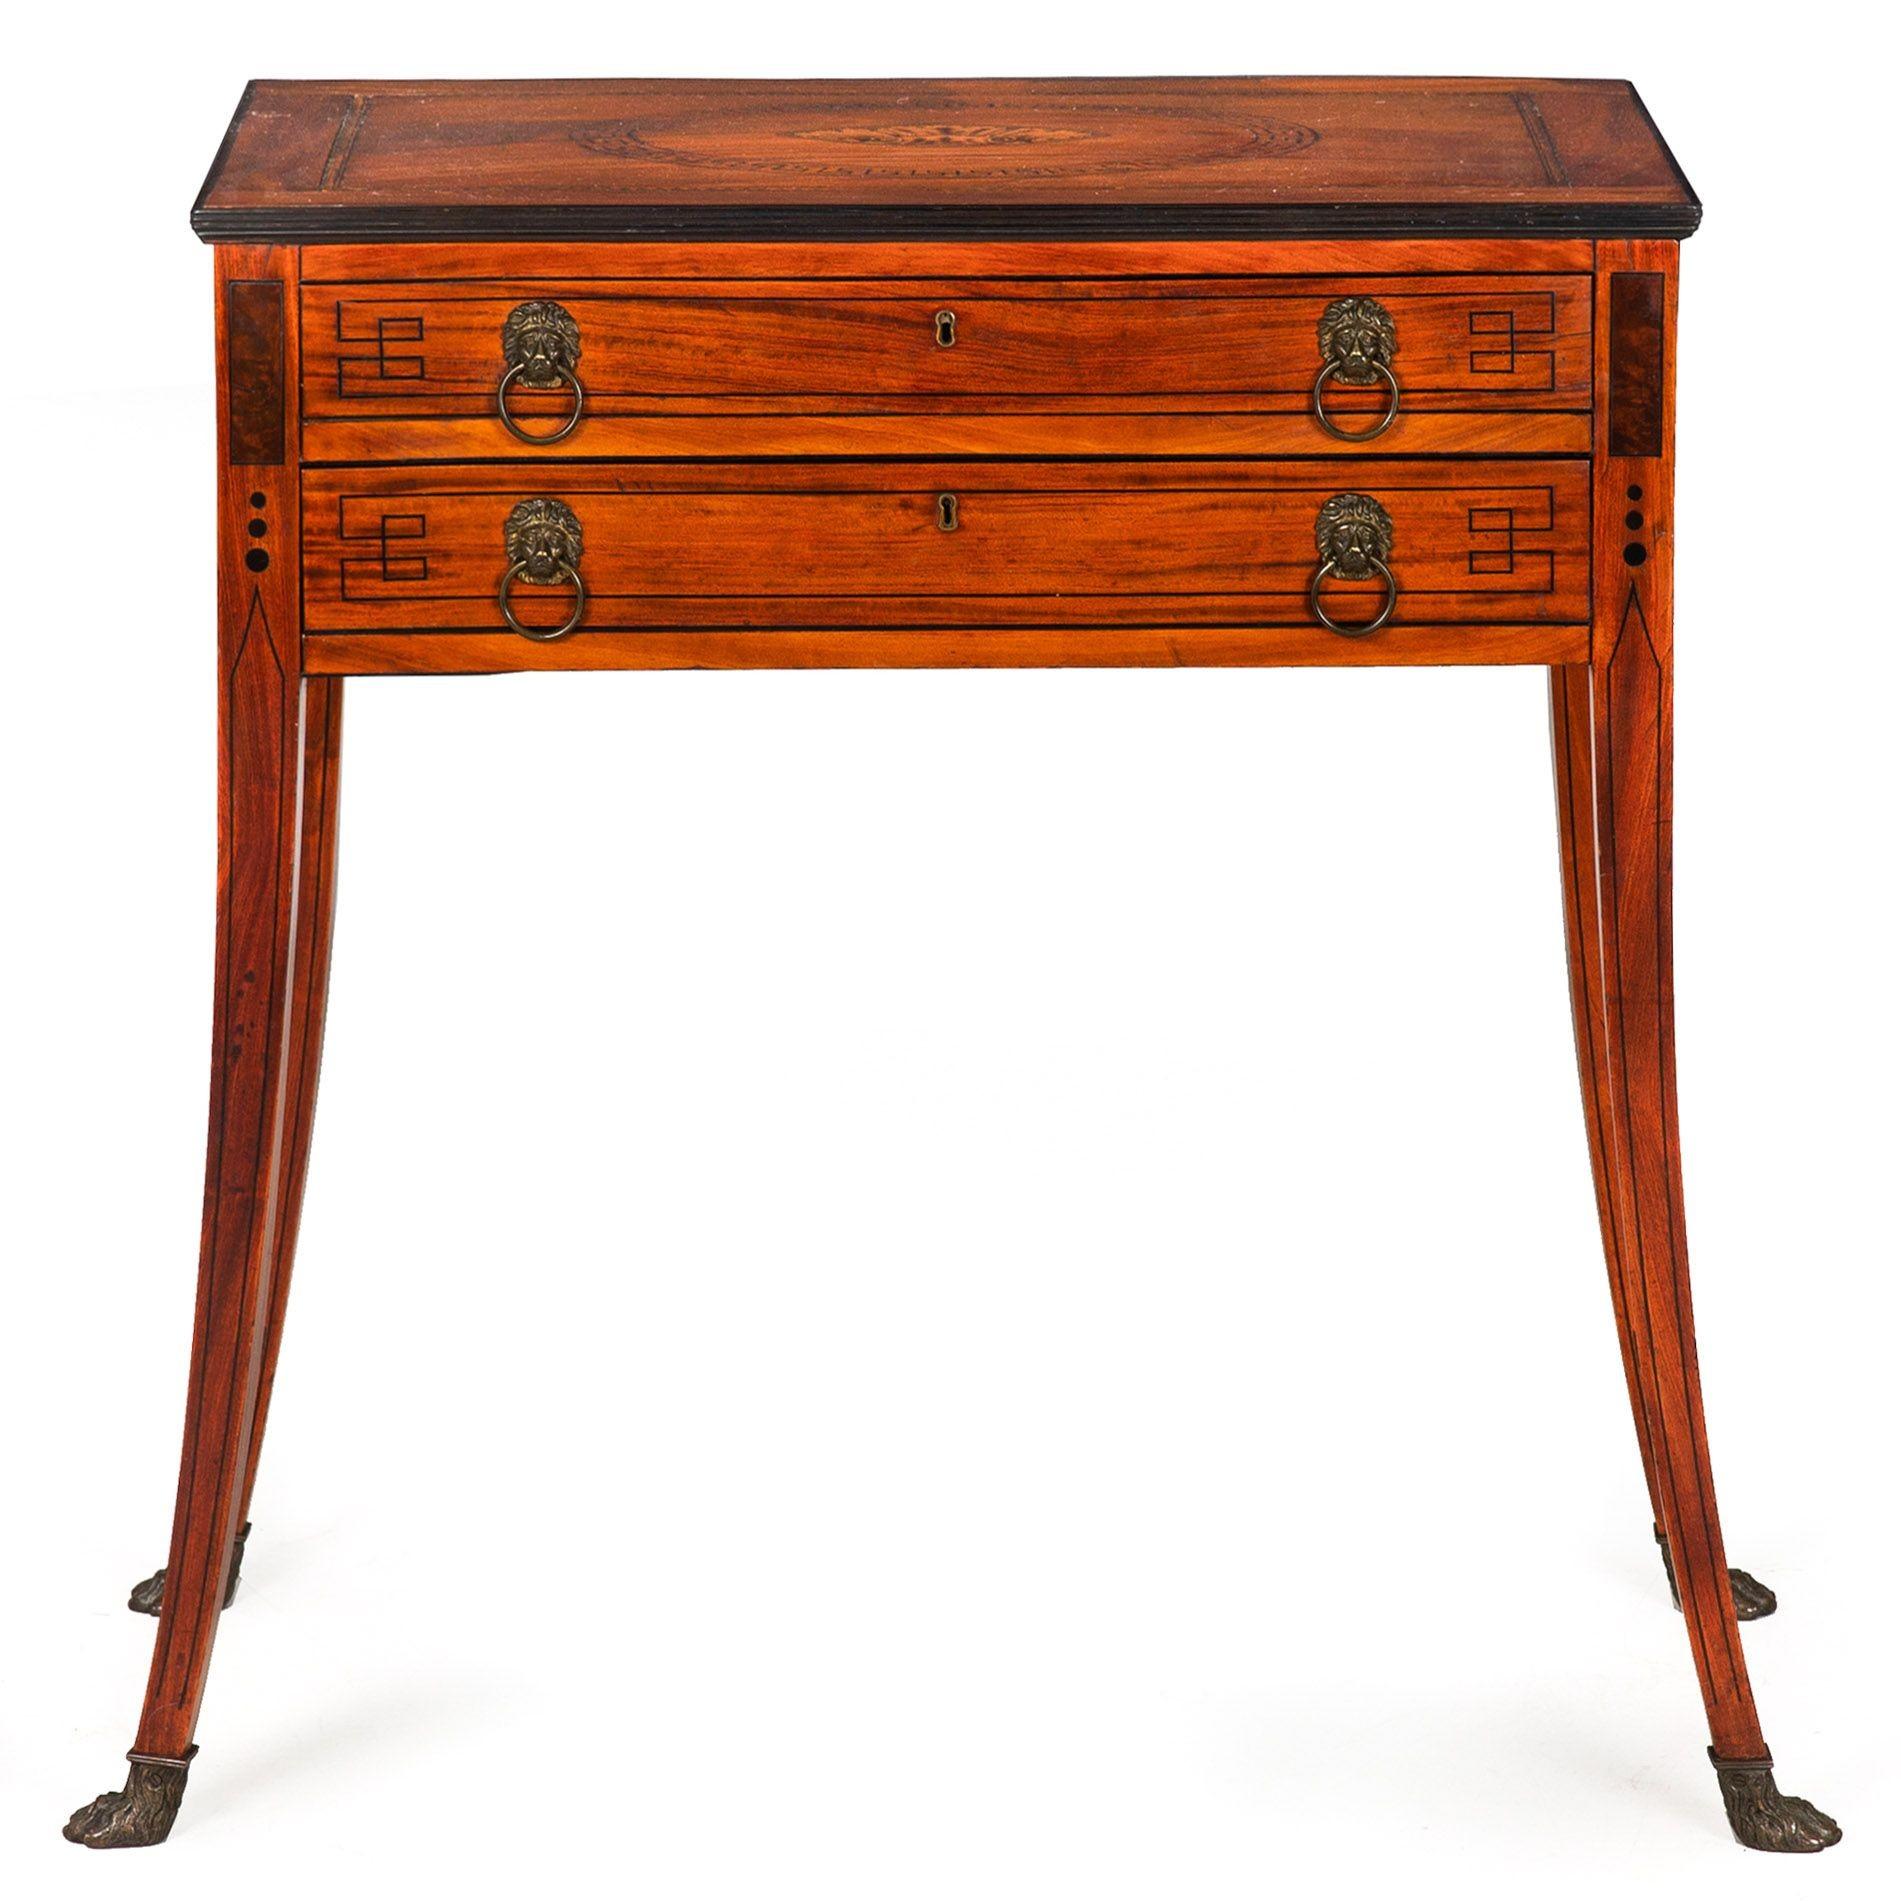 REGENCY INLAID SATINWOOD WRITING TABLE ON ANIMAL PAWS
England, ca. 1820
Item # 309JGP22Q
The form of this table is incredibly compelling and eye-catching, the legs featuring an exaggerated outward splay that far outpaces the boundaries of the